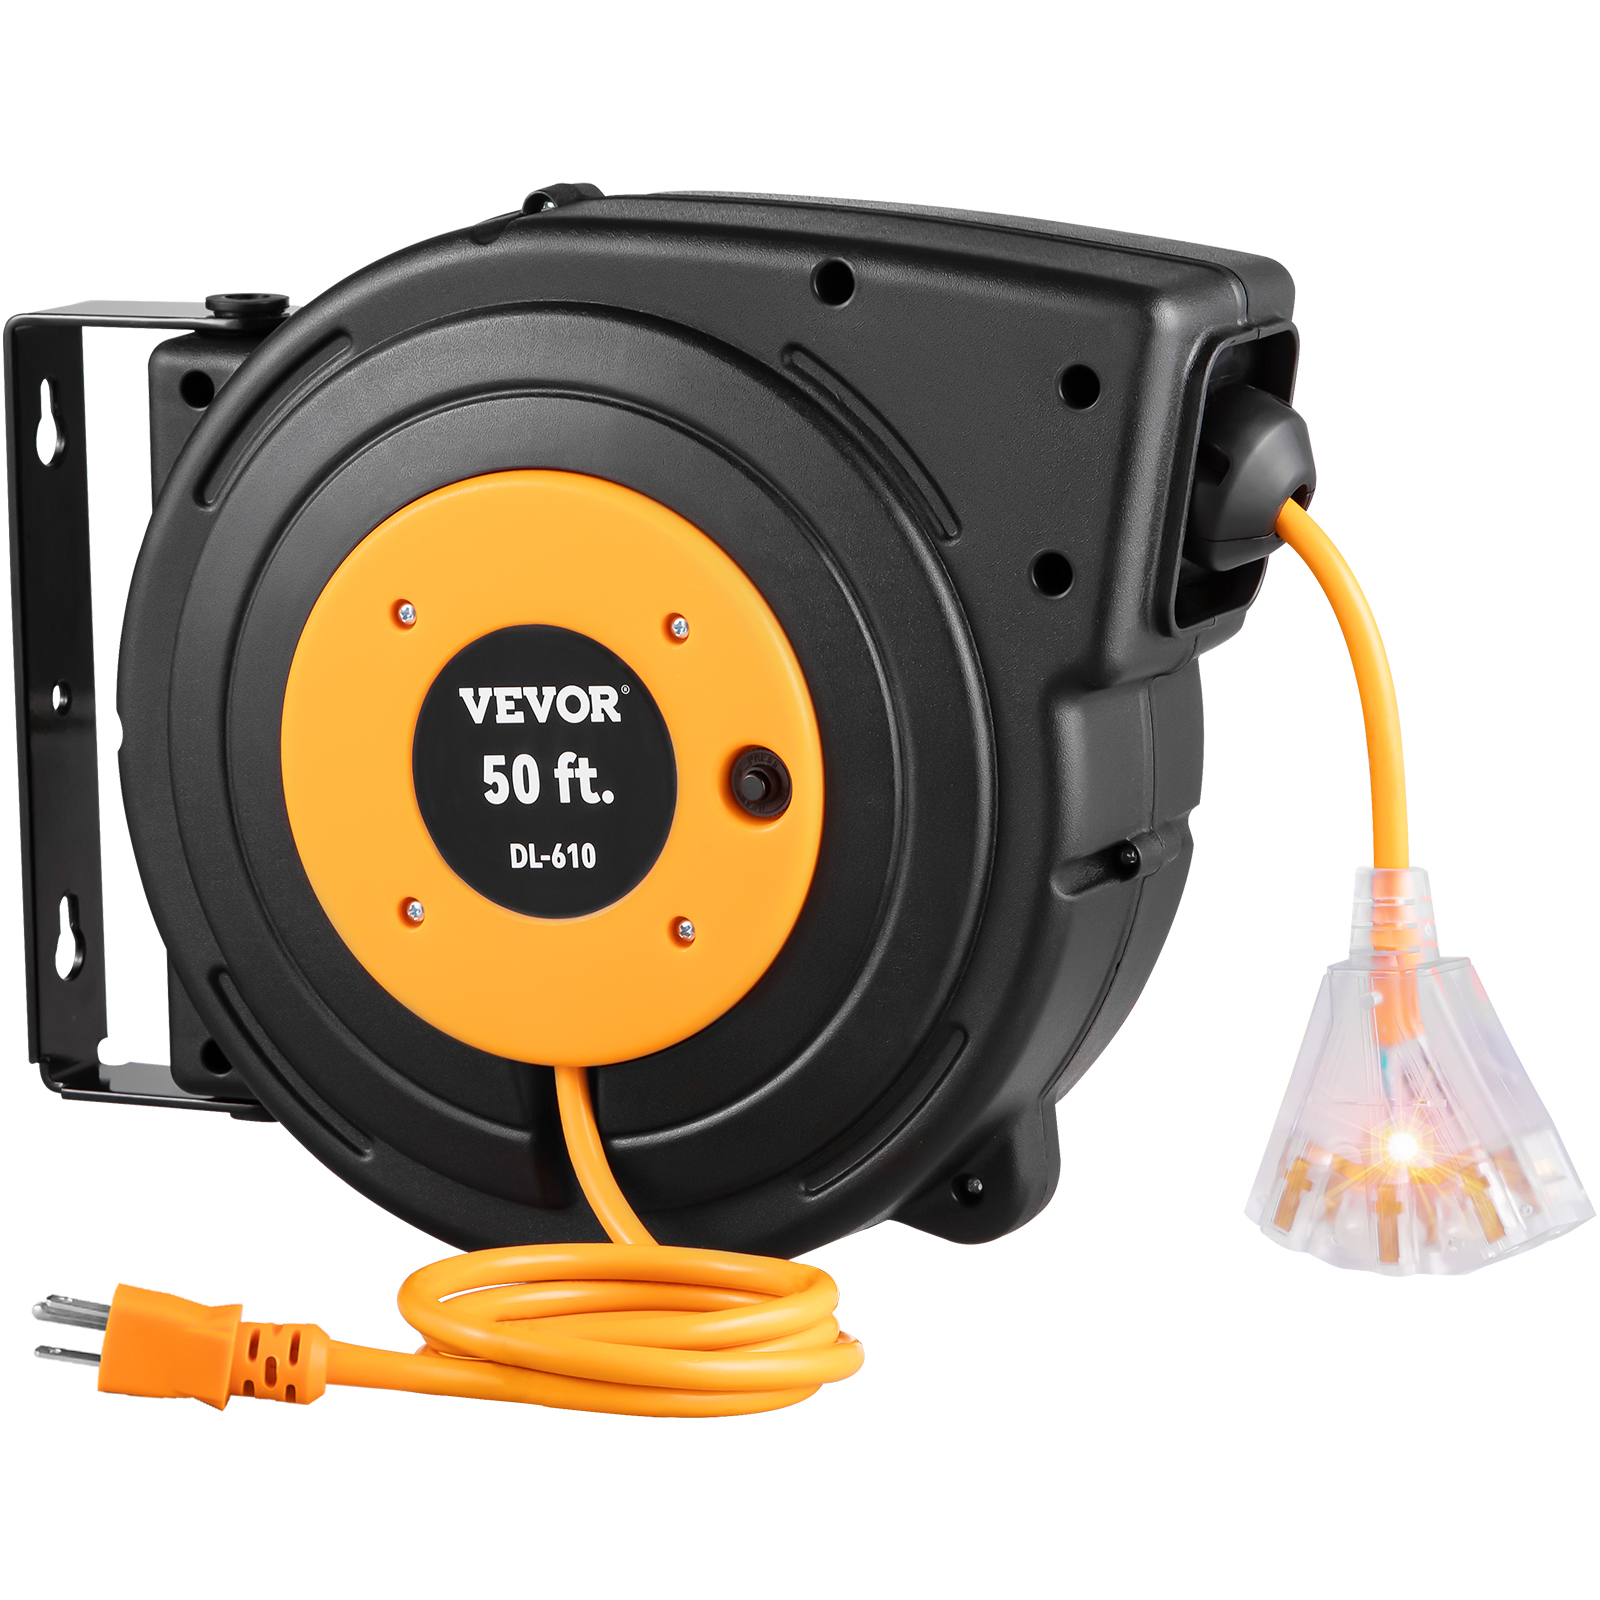 VEVOR 50ft Retractable Extension Cord Reel 14AWG/3CSJTOW Power Cord ...